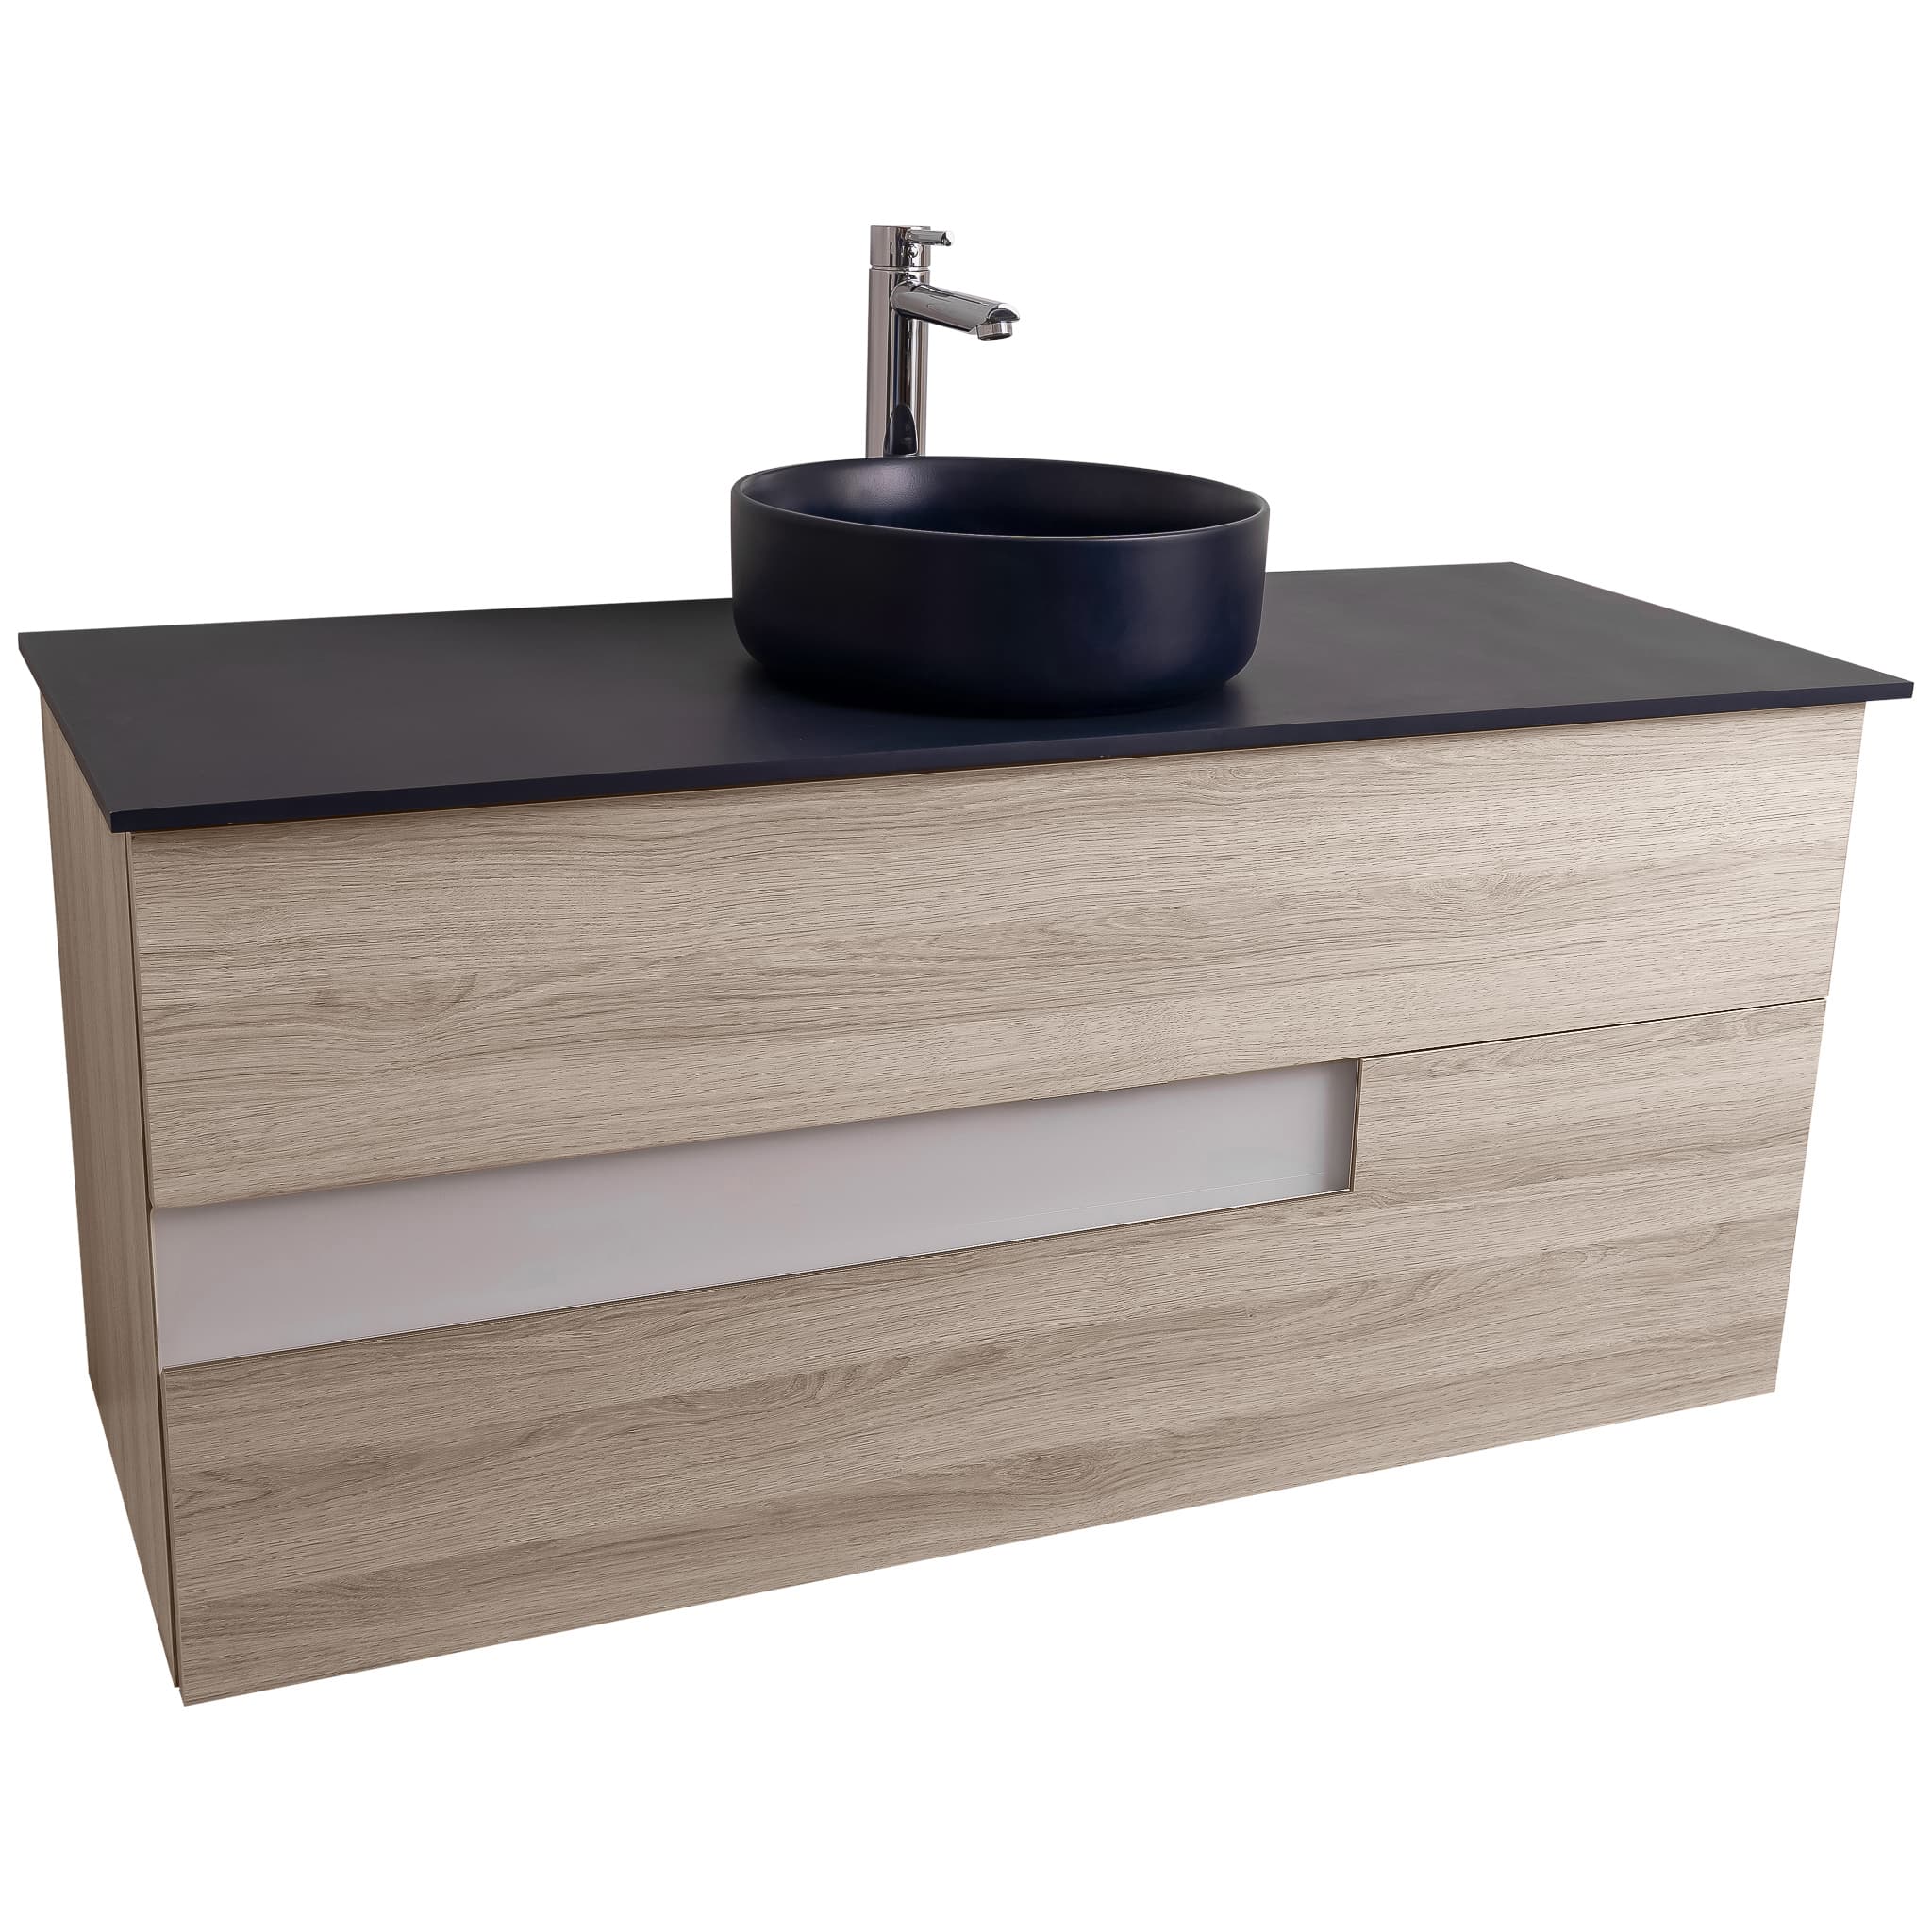 Vision 47.5 Natural Light Wood Cabinet, Ares Navy Blue Top And Ares Navy Blue Ceramic Basin, Wall Mounted Modern Vanity Set